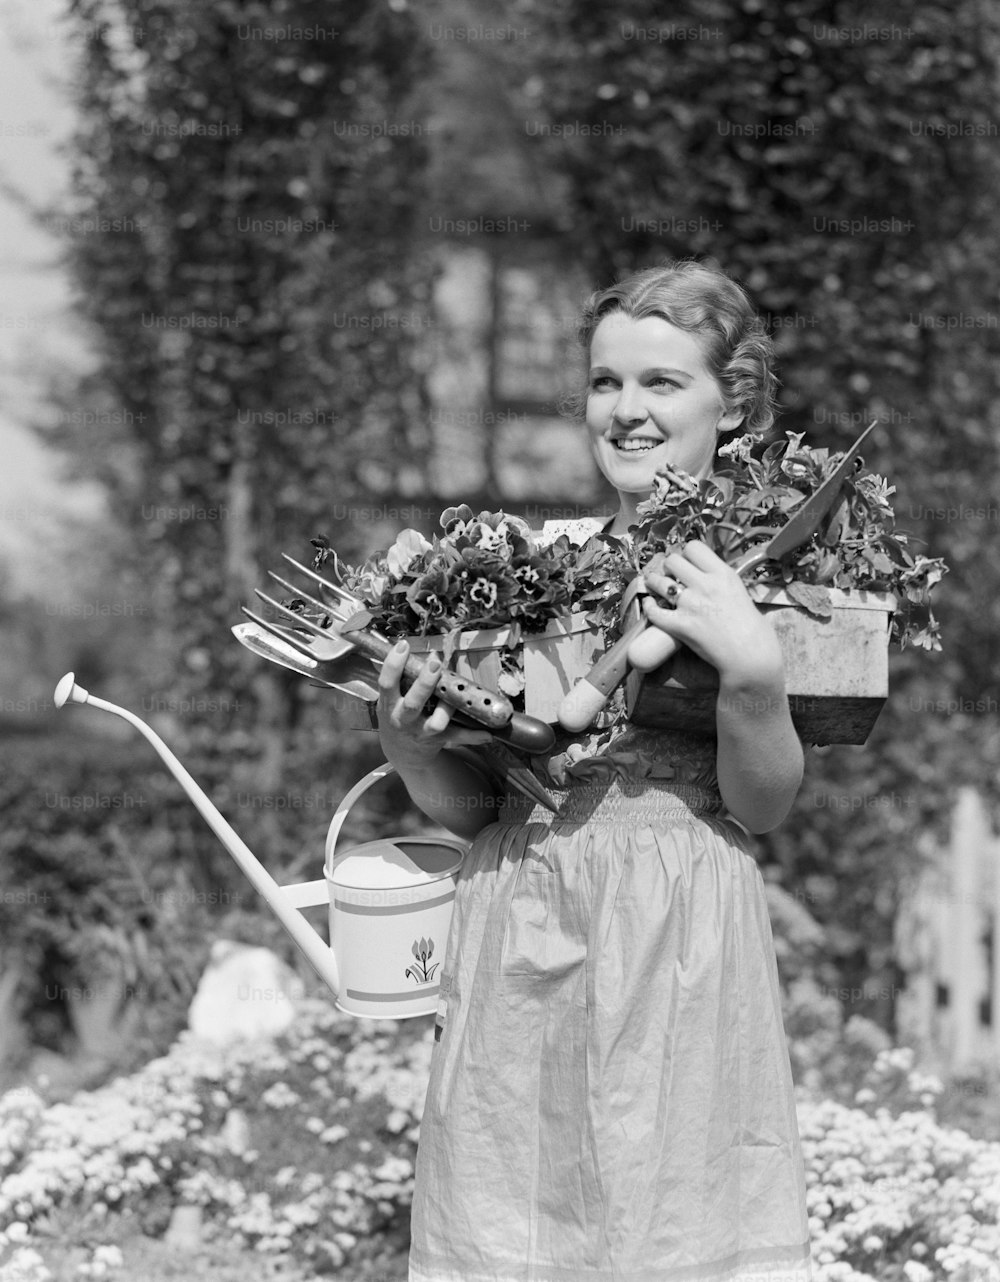 UNITED STATES - CIRCA 1930s:  Woman standing in garden, smiling, arms full carrying watering can, garden tools and potted plants, portrait.